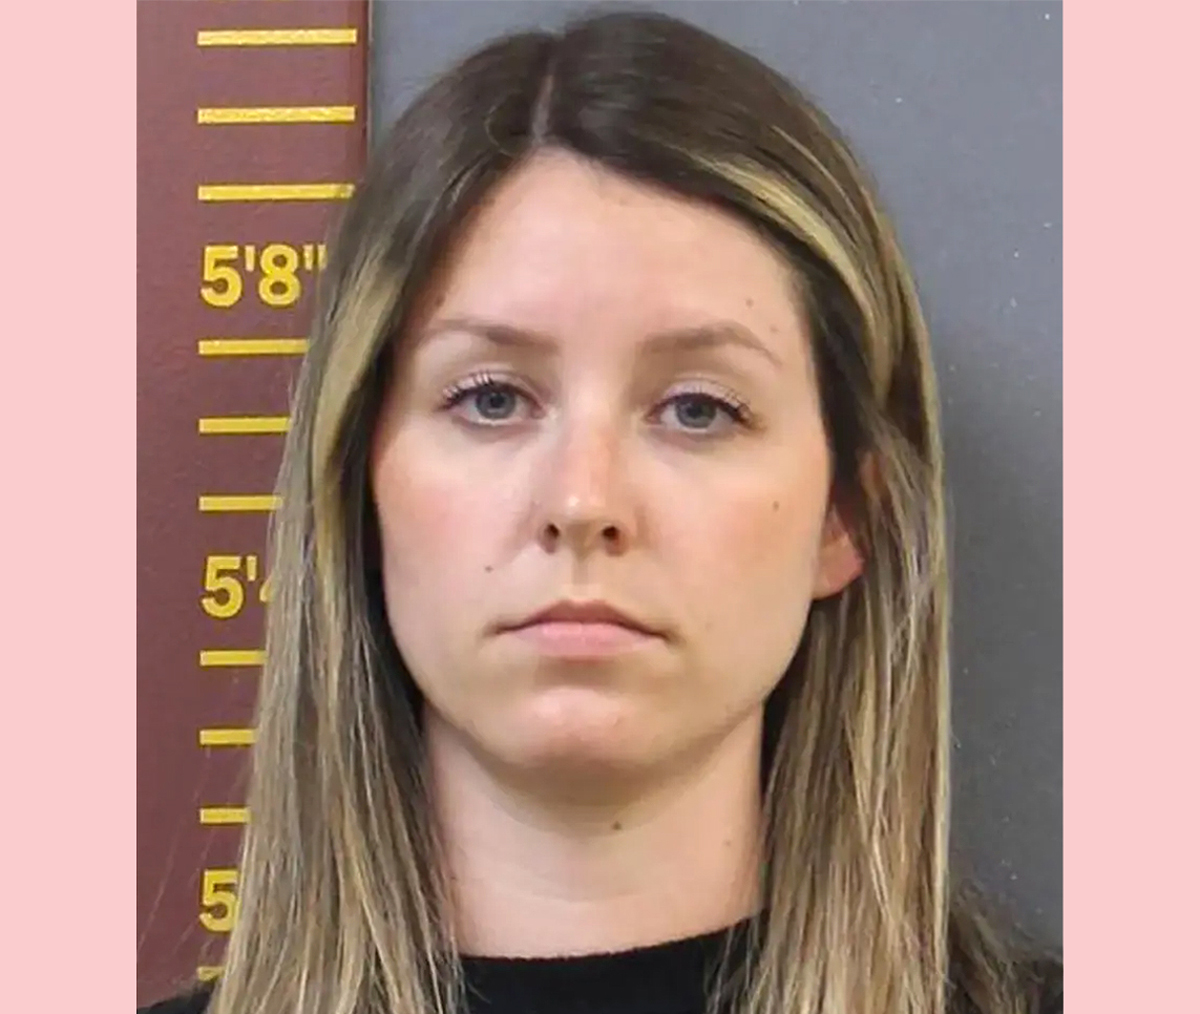 #Chorus Teacher Arrested For Alleged Sex With Student After Her Husband Discovered Racy Evidence On Family iPad!